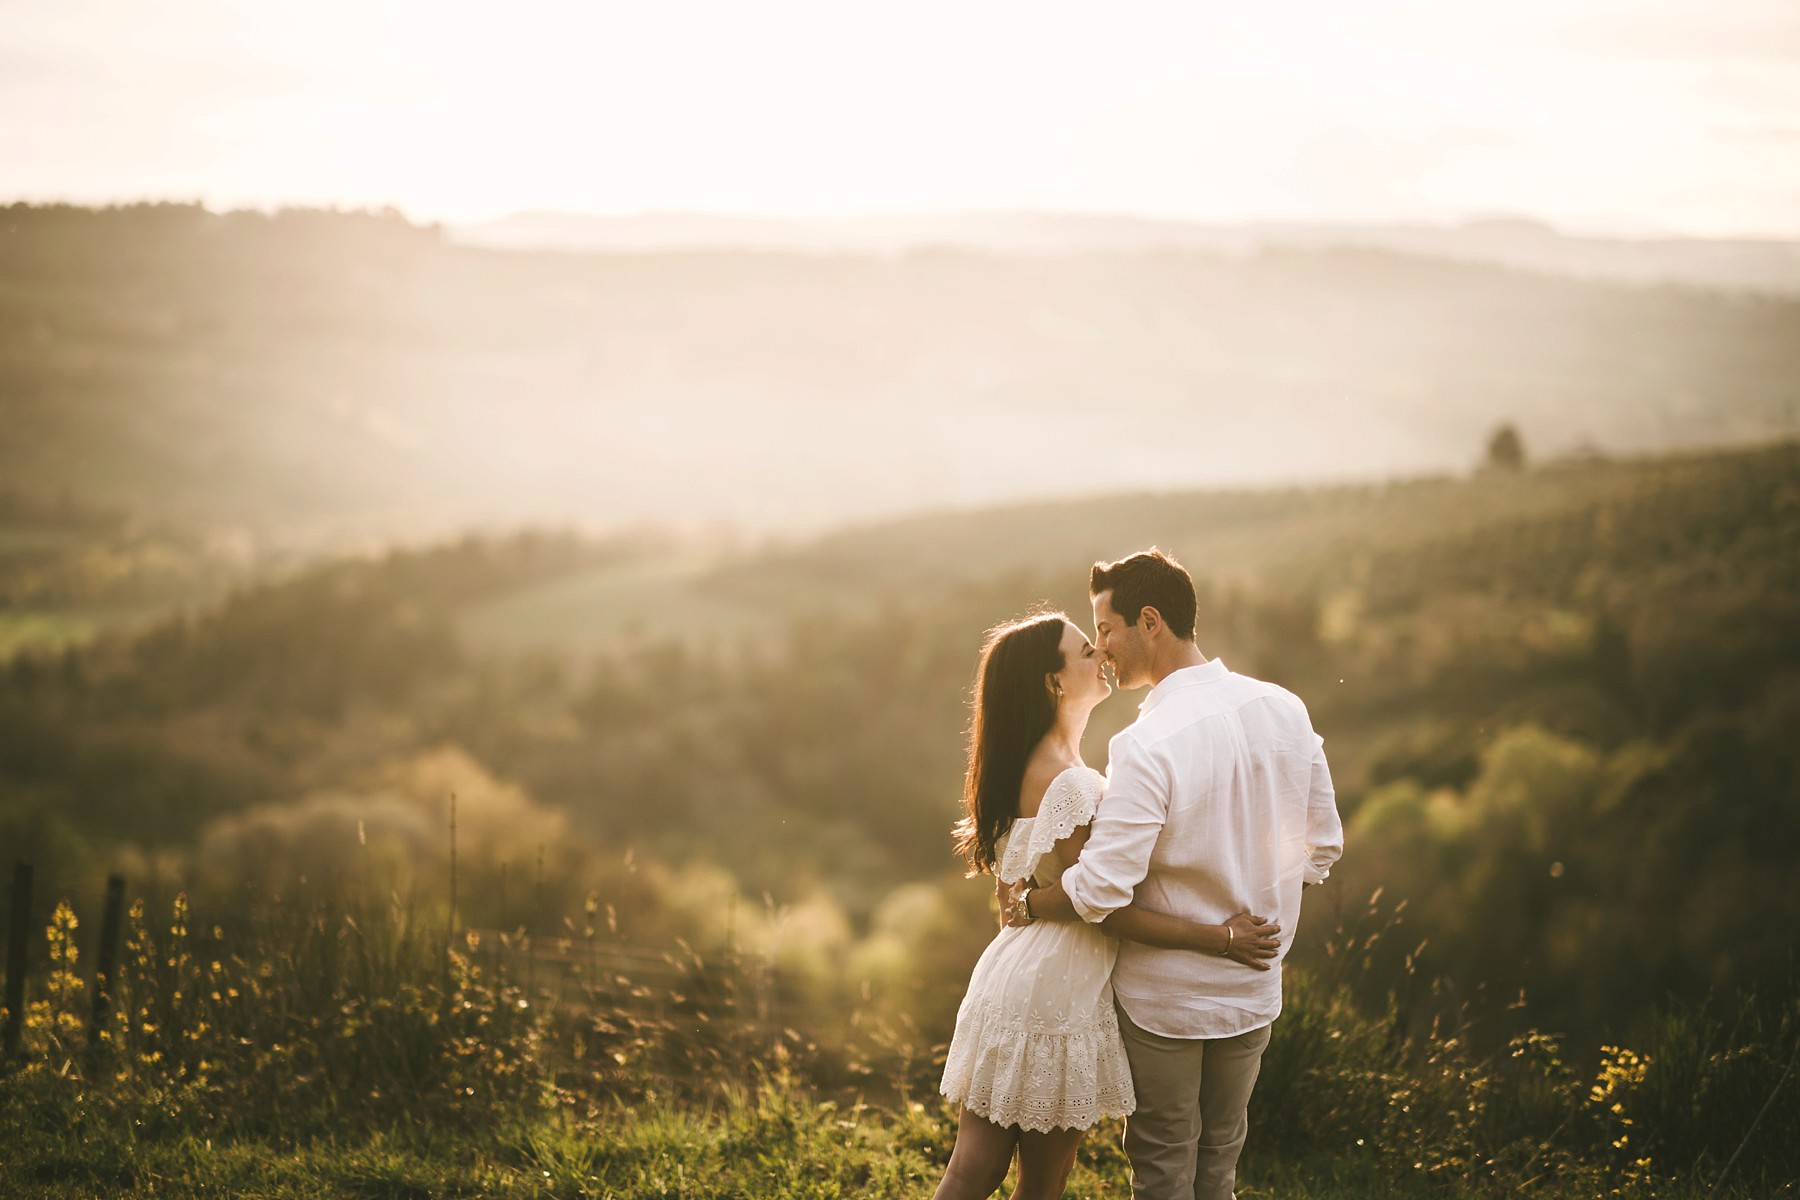 Special and incredible pre-wedding engagement photo session surrounded by all the beauty that Tuscany and Chianti hills can offer